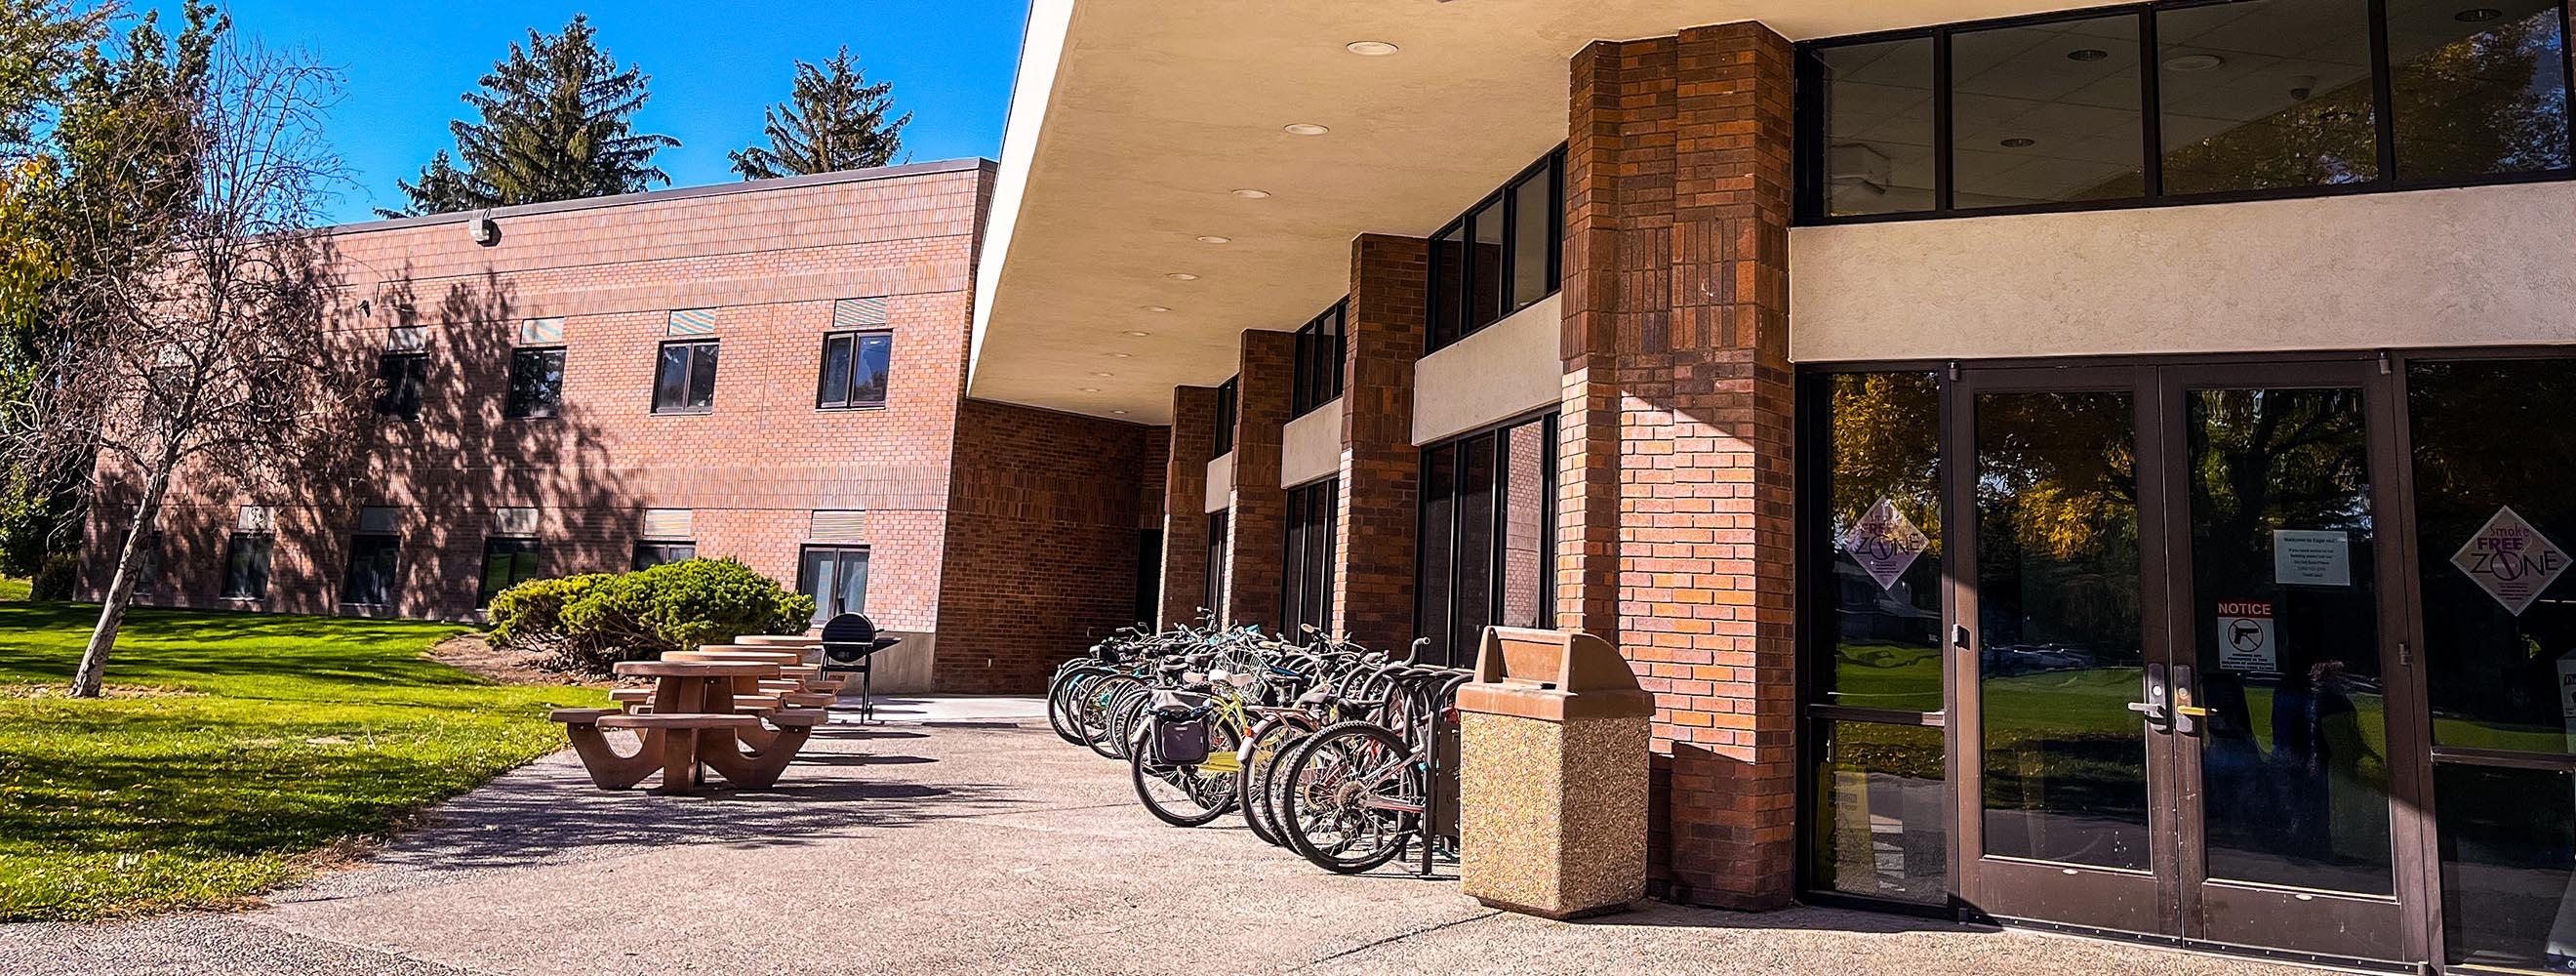 Student housing entrance with bike racks and large tables